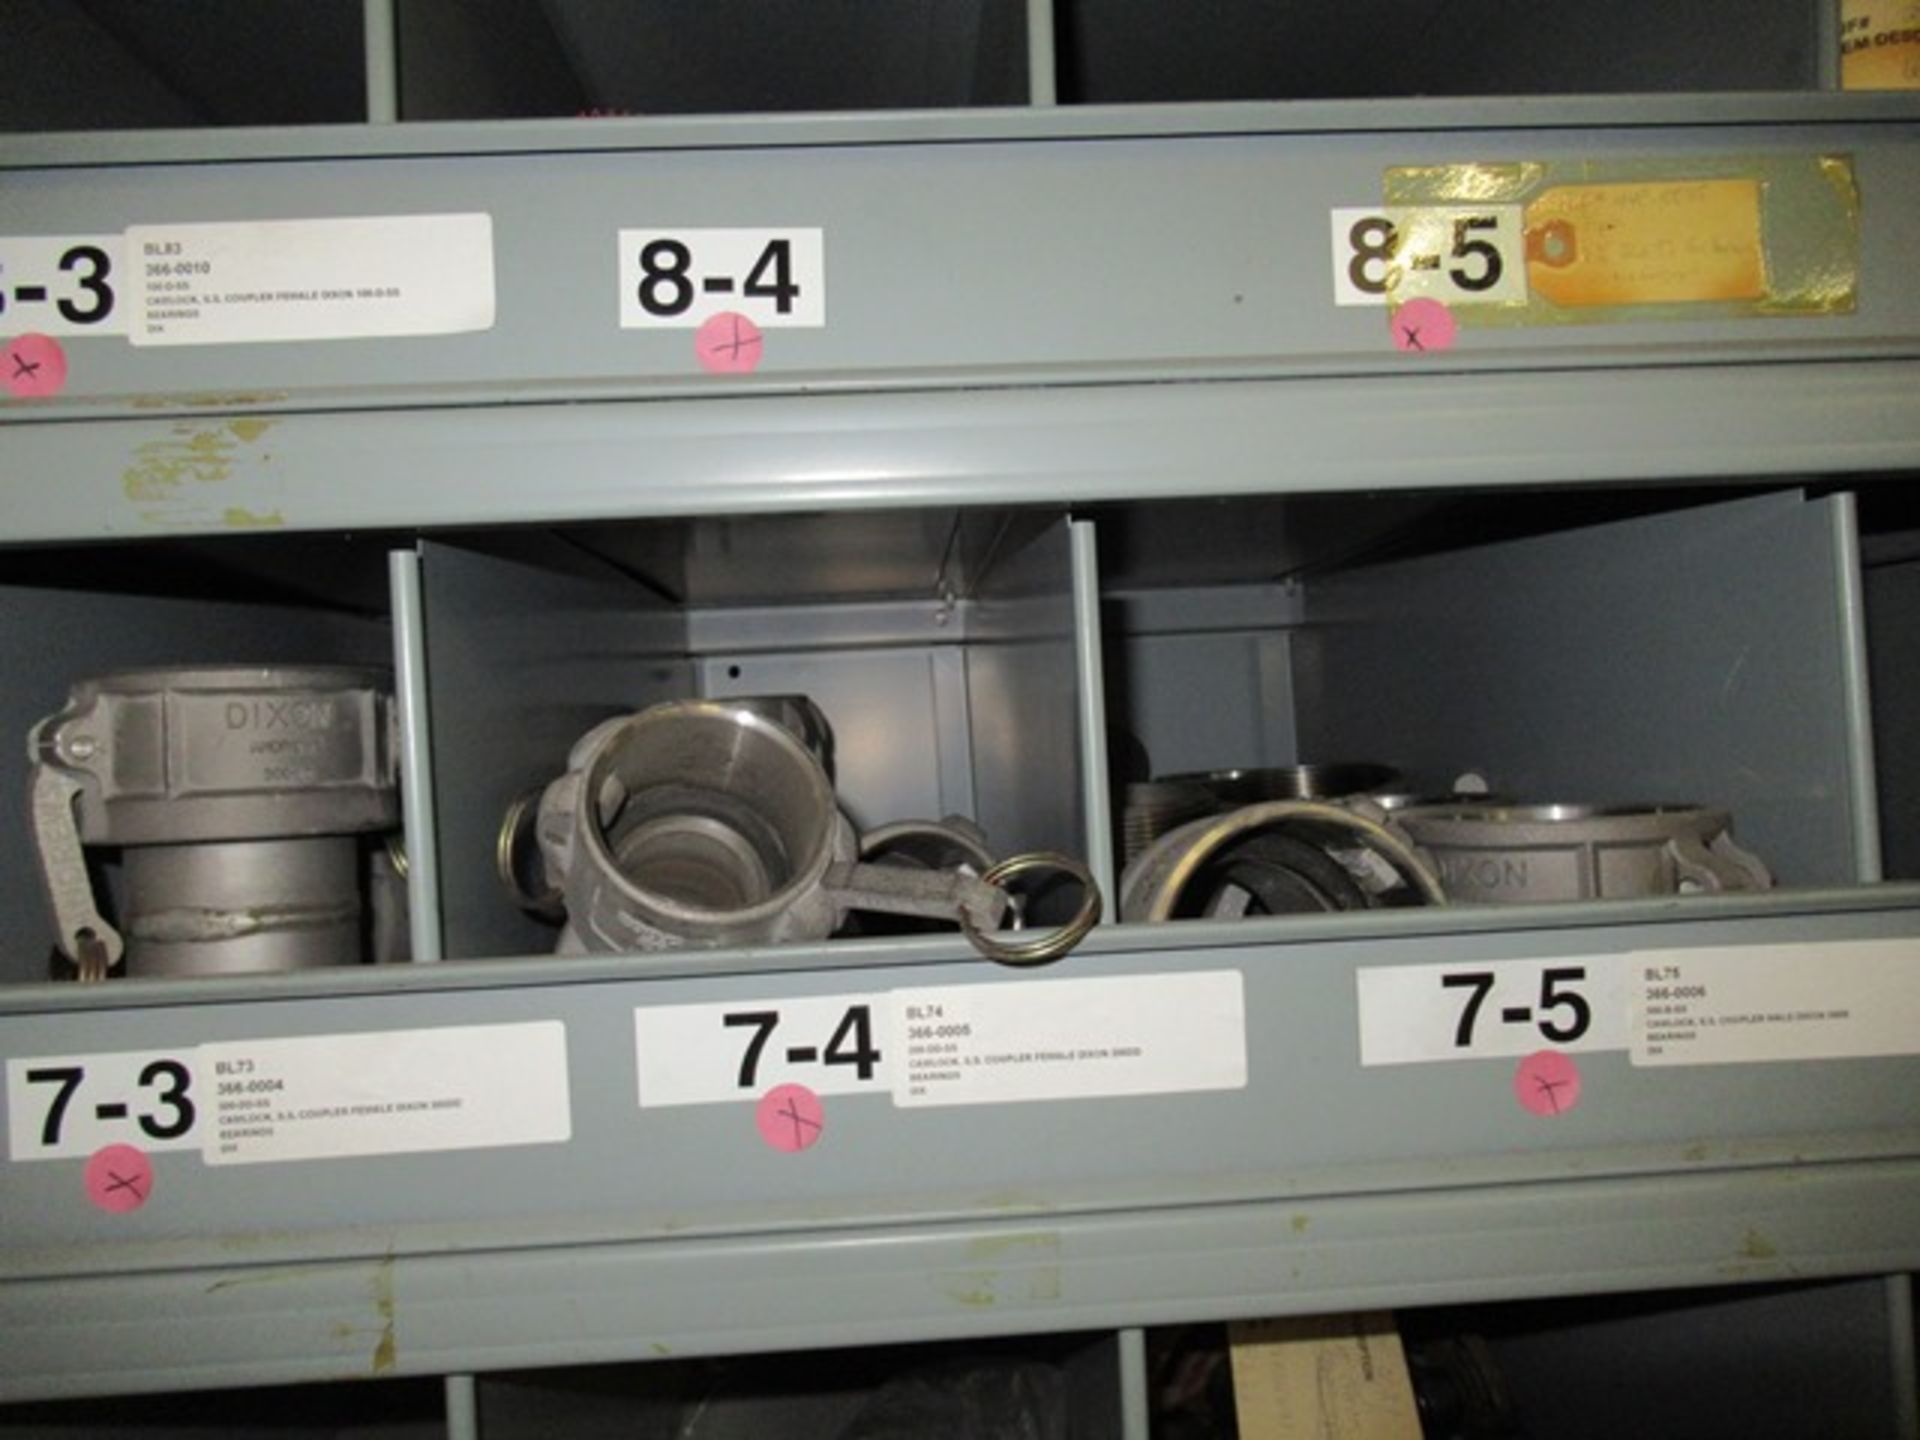 LOT ASST. CF, VELAN, APOLLO, FNW VALVES, FLOW SWITCHES, FITTINGS, COUPLINGS, ETC. 2-SECTIONS OF - Image 5 of 9